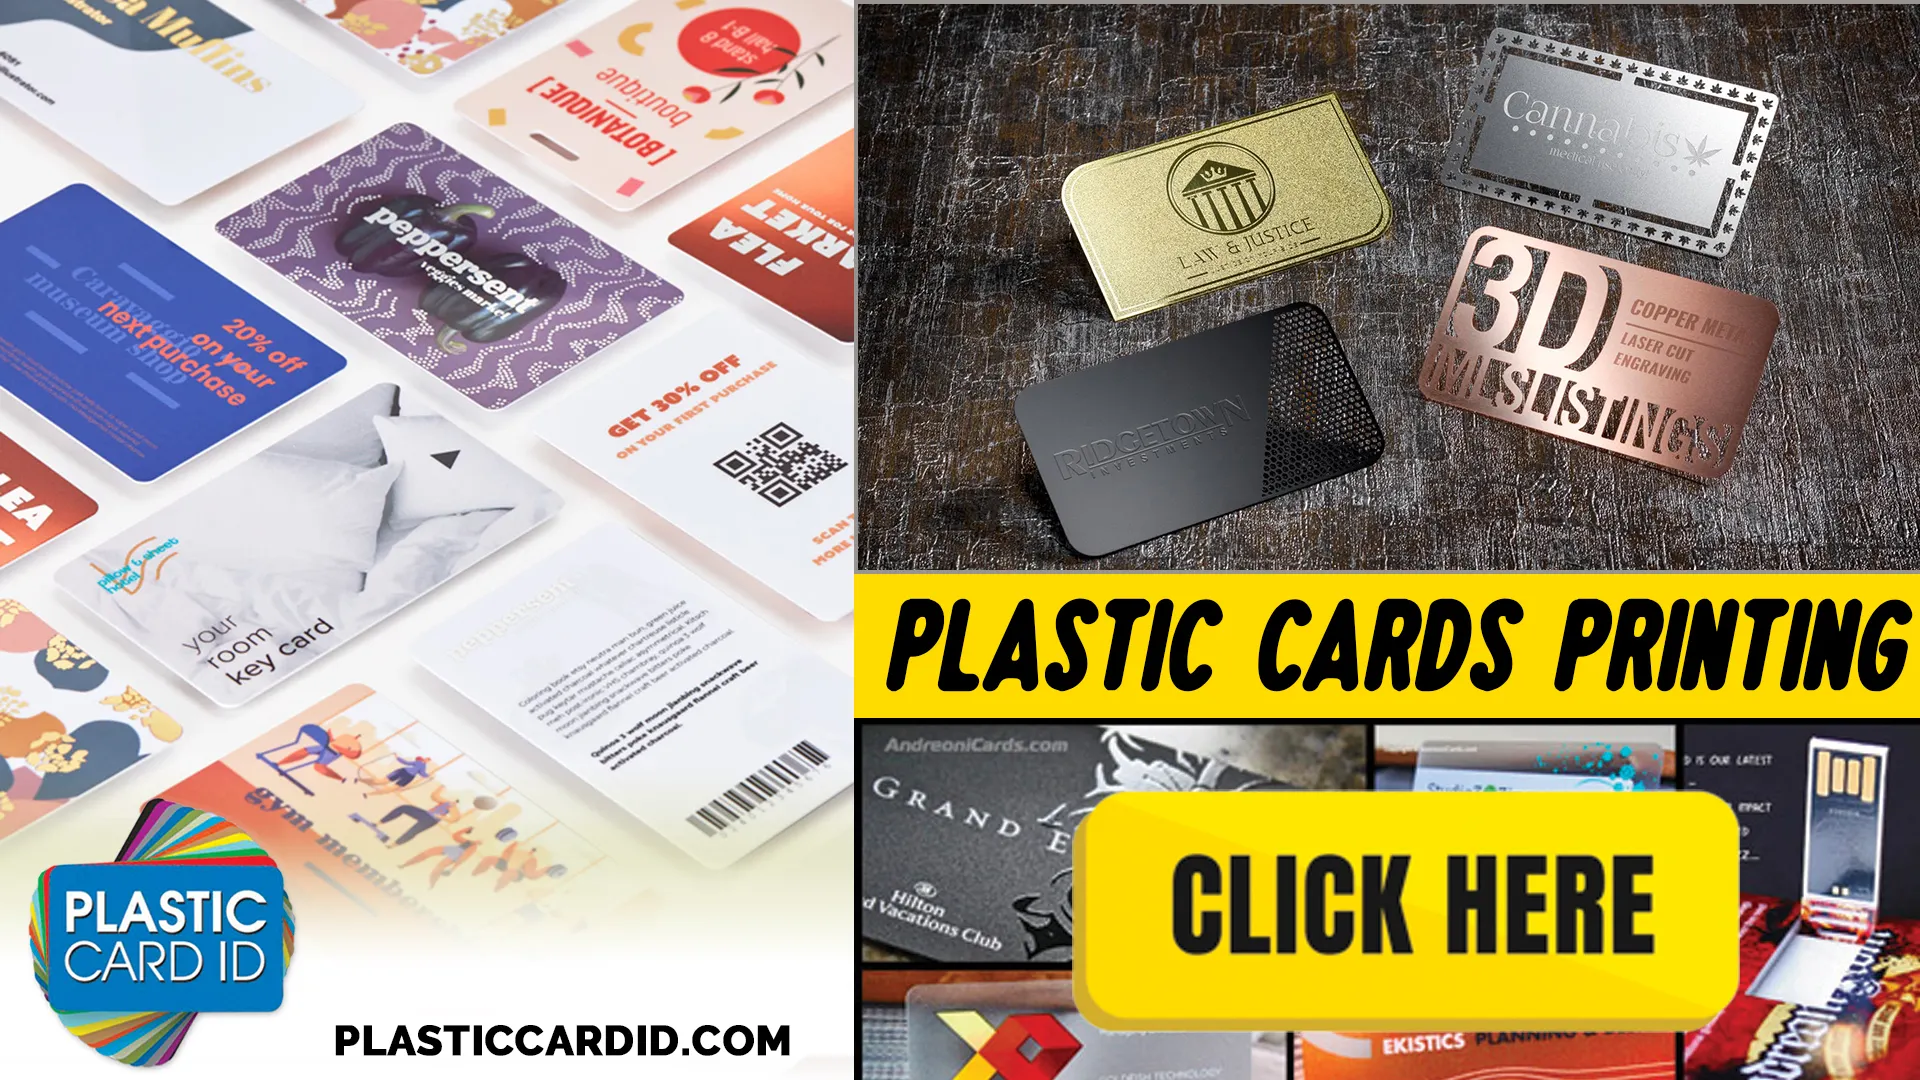 The Evolution of Plastic Card ID
's Manufacturing Expertise